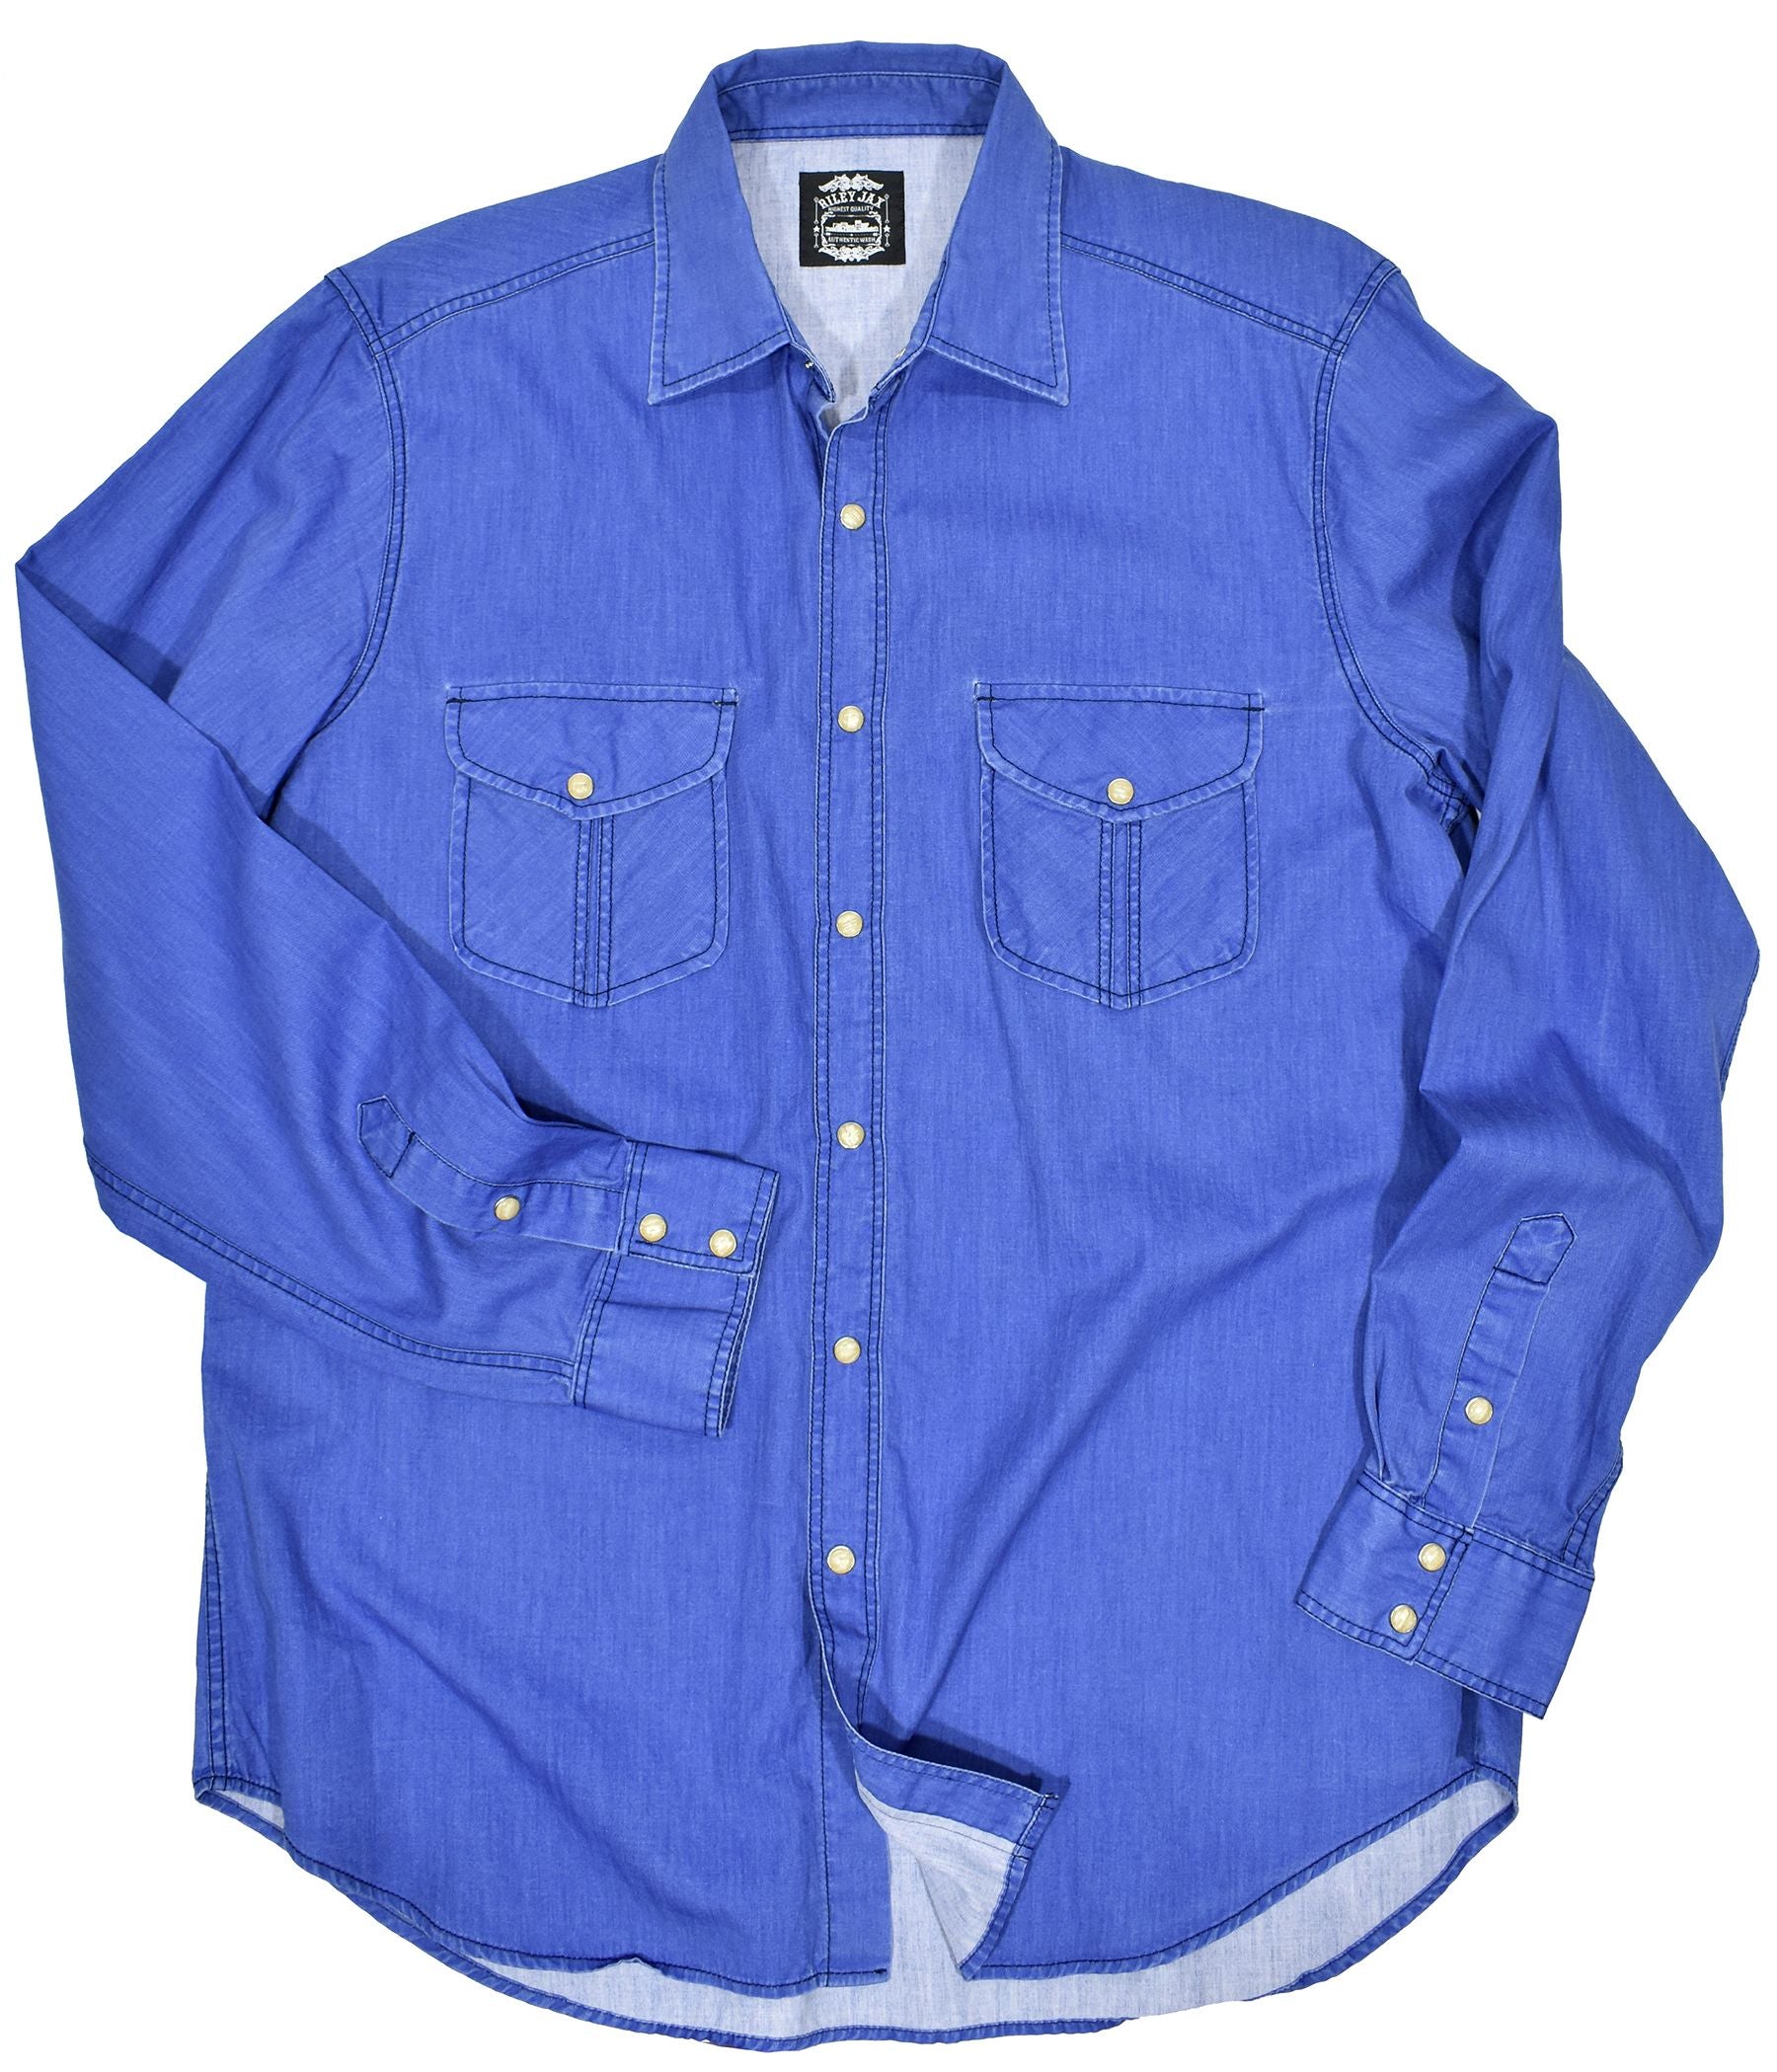 Riley Jax Plains Washed Solid Shirt  100% cotton, triple washed for softness. Distressed detailing. Signature snaps. Double pockets with Western attitude. Classic shaped fit.